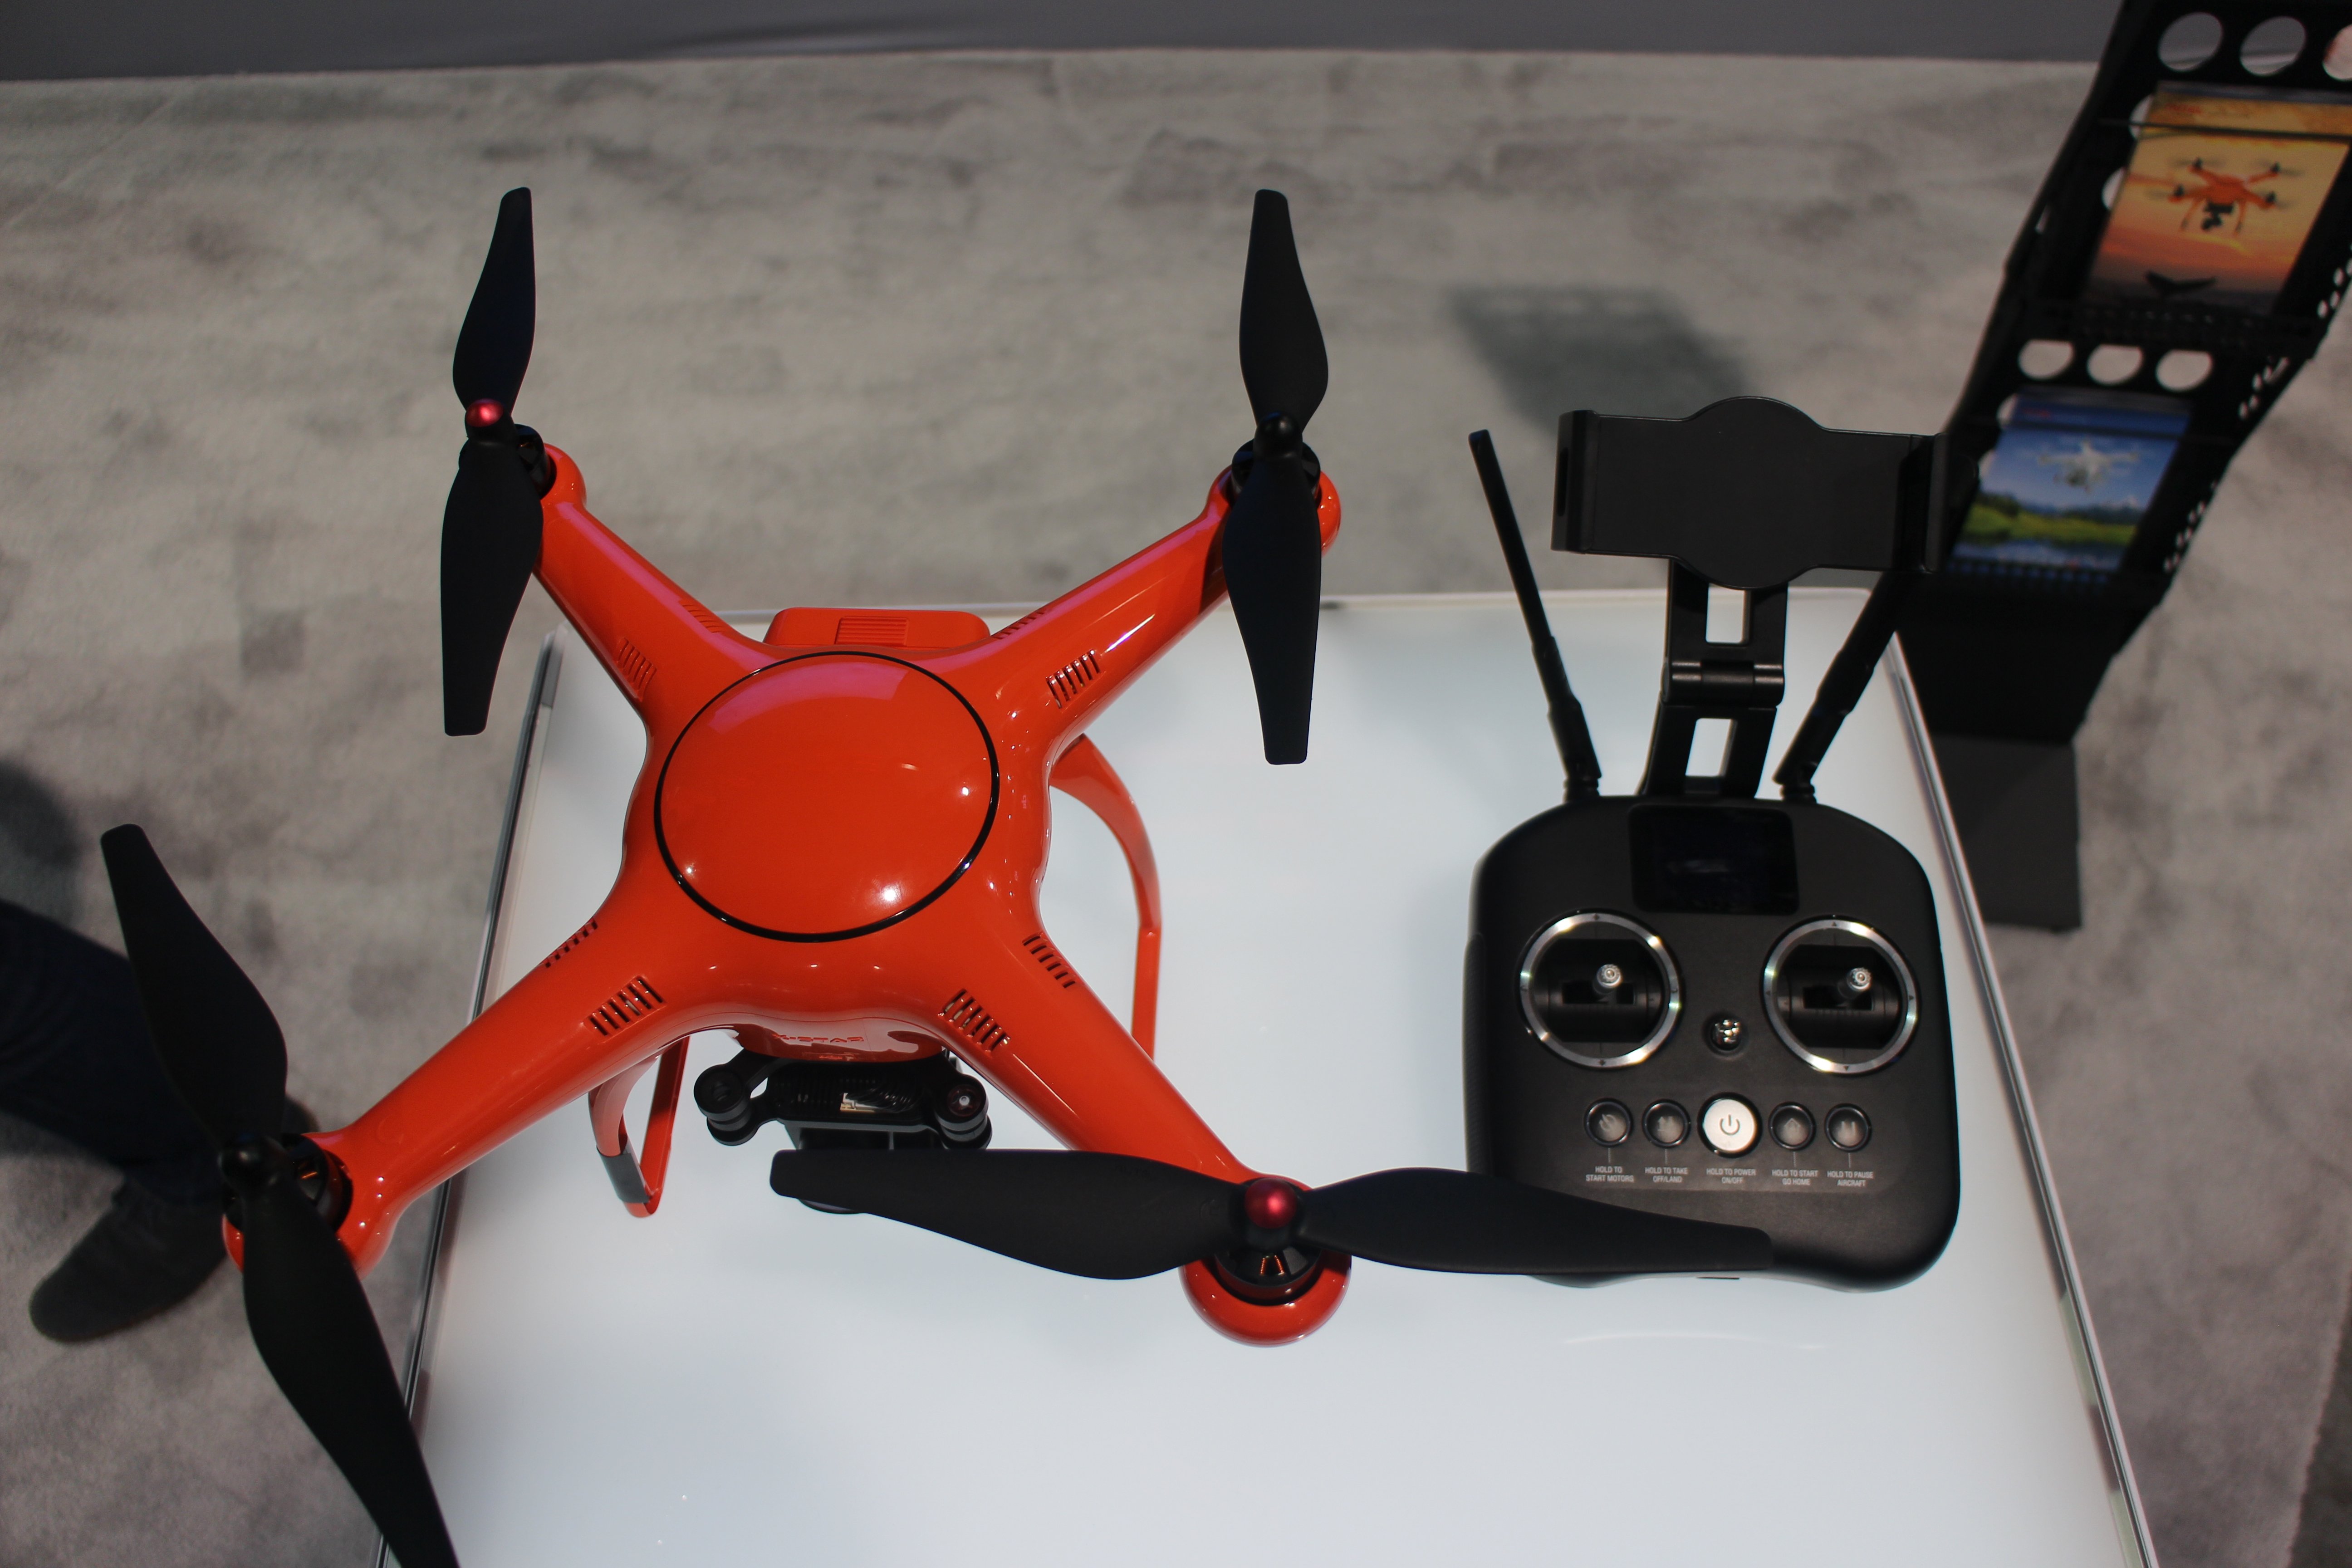 unknown drone company roundup ces 2016 img 1953